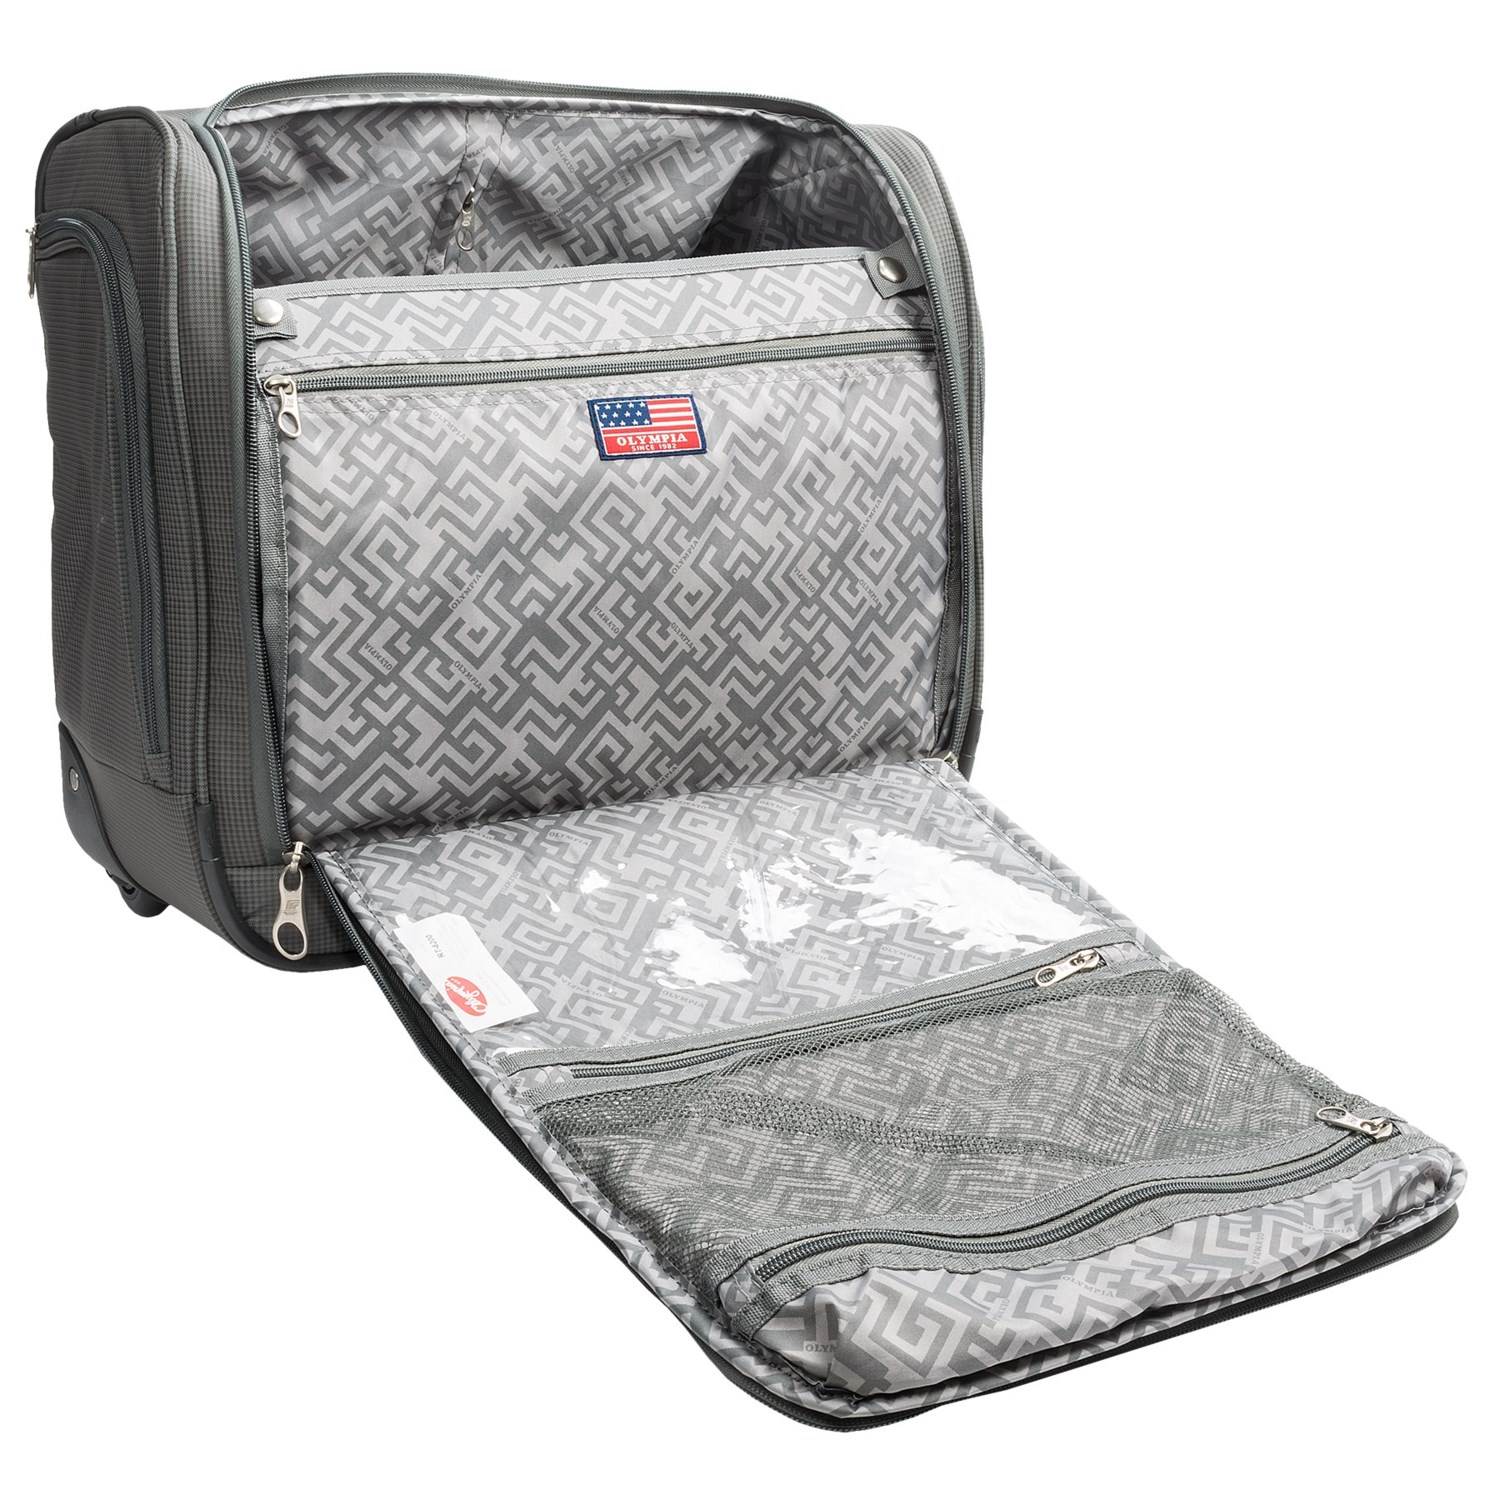 Olympia Under the Seat Rolling Carry-On Bag - 15” - Save 50%